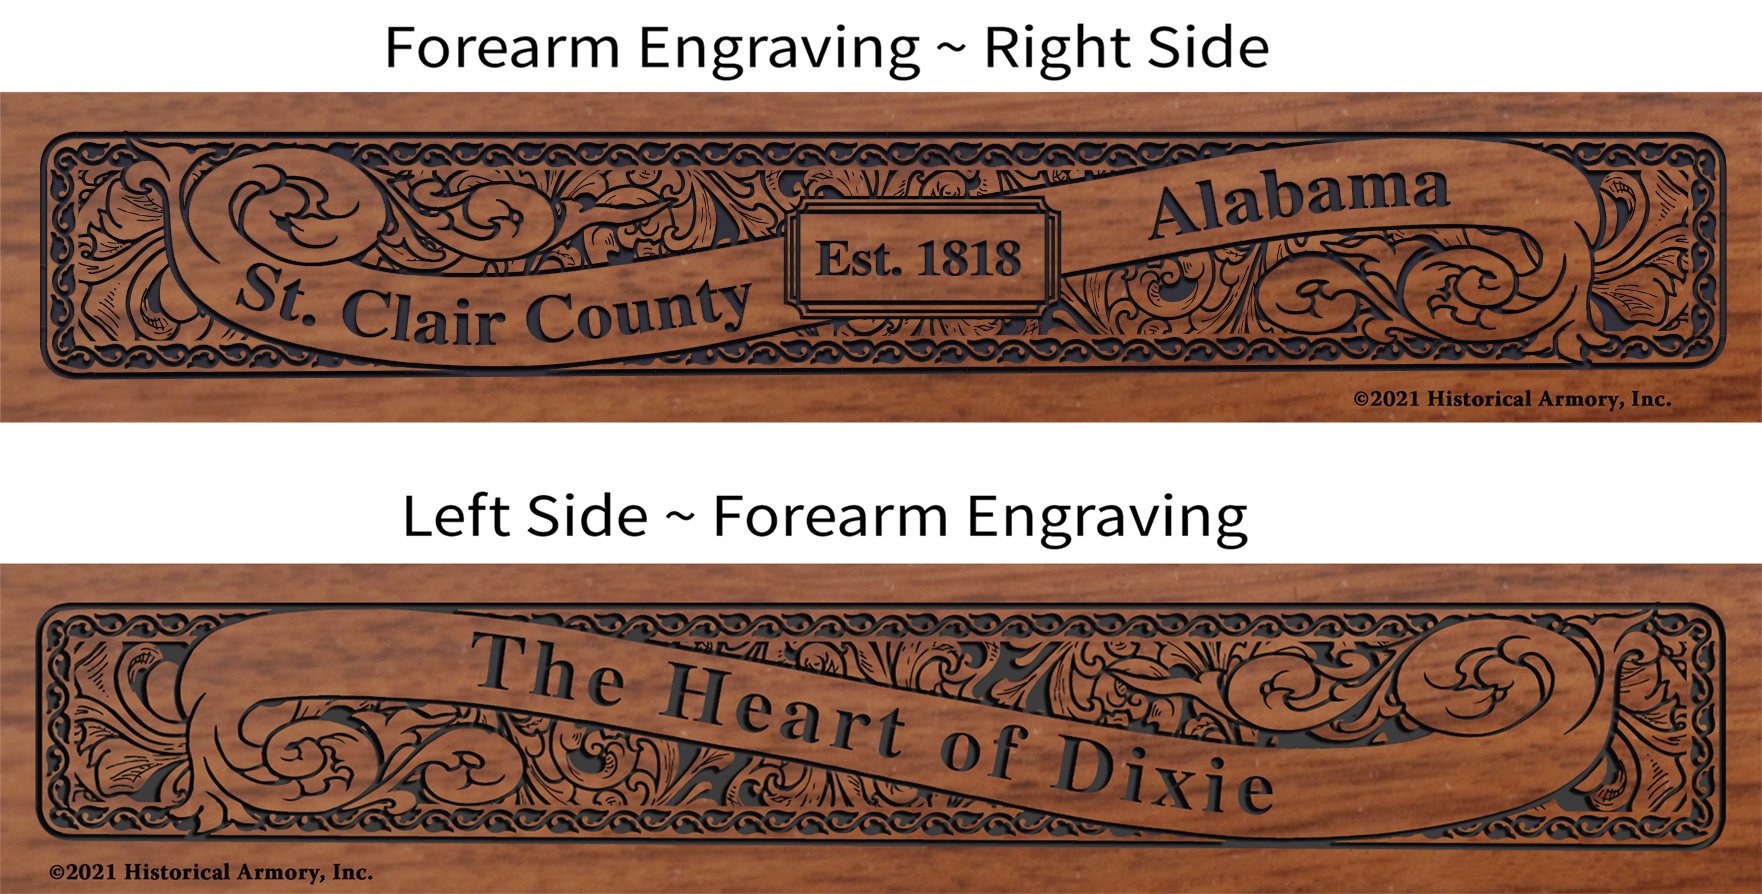 St. Clair County Alabama Establishment and Motto History Engraved Rifle Forearm